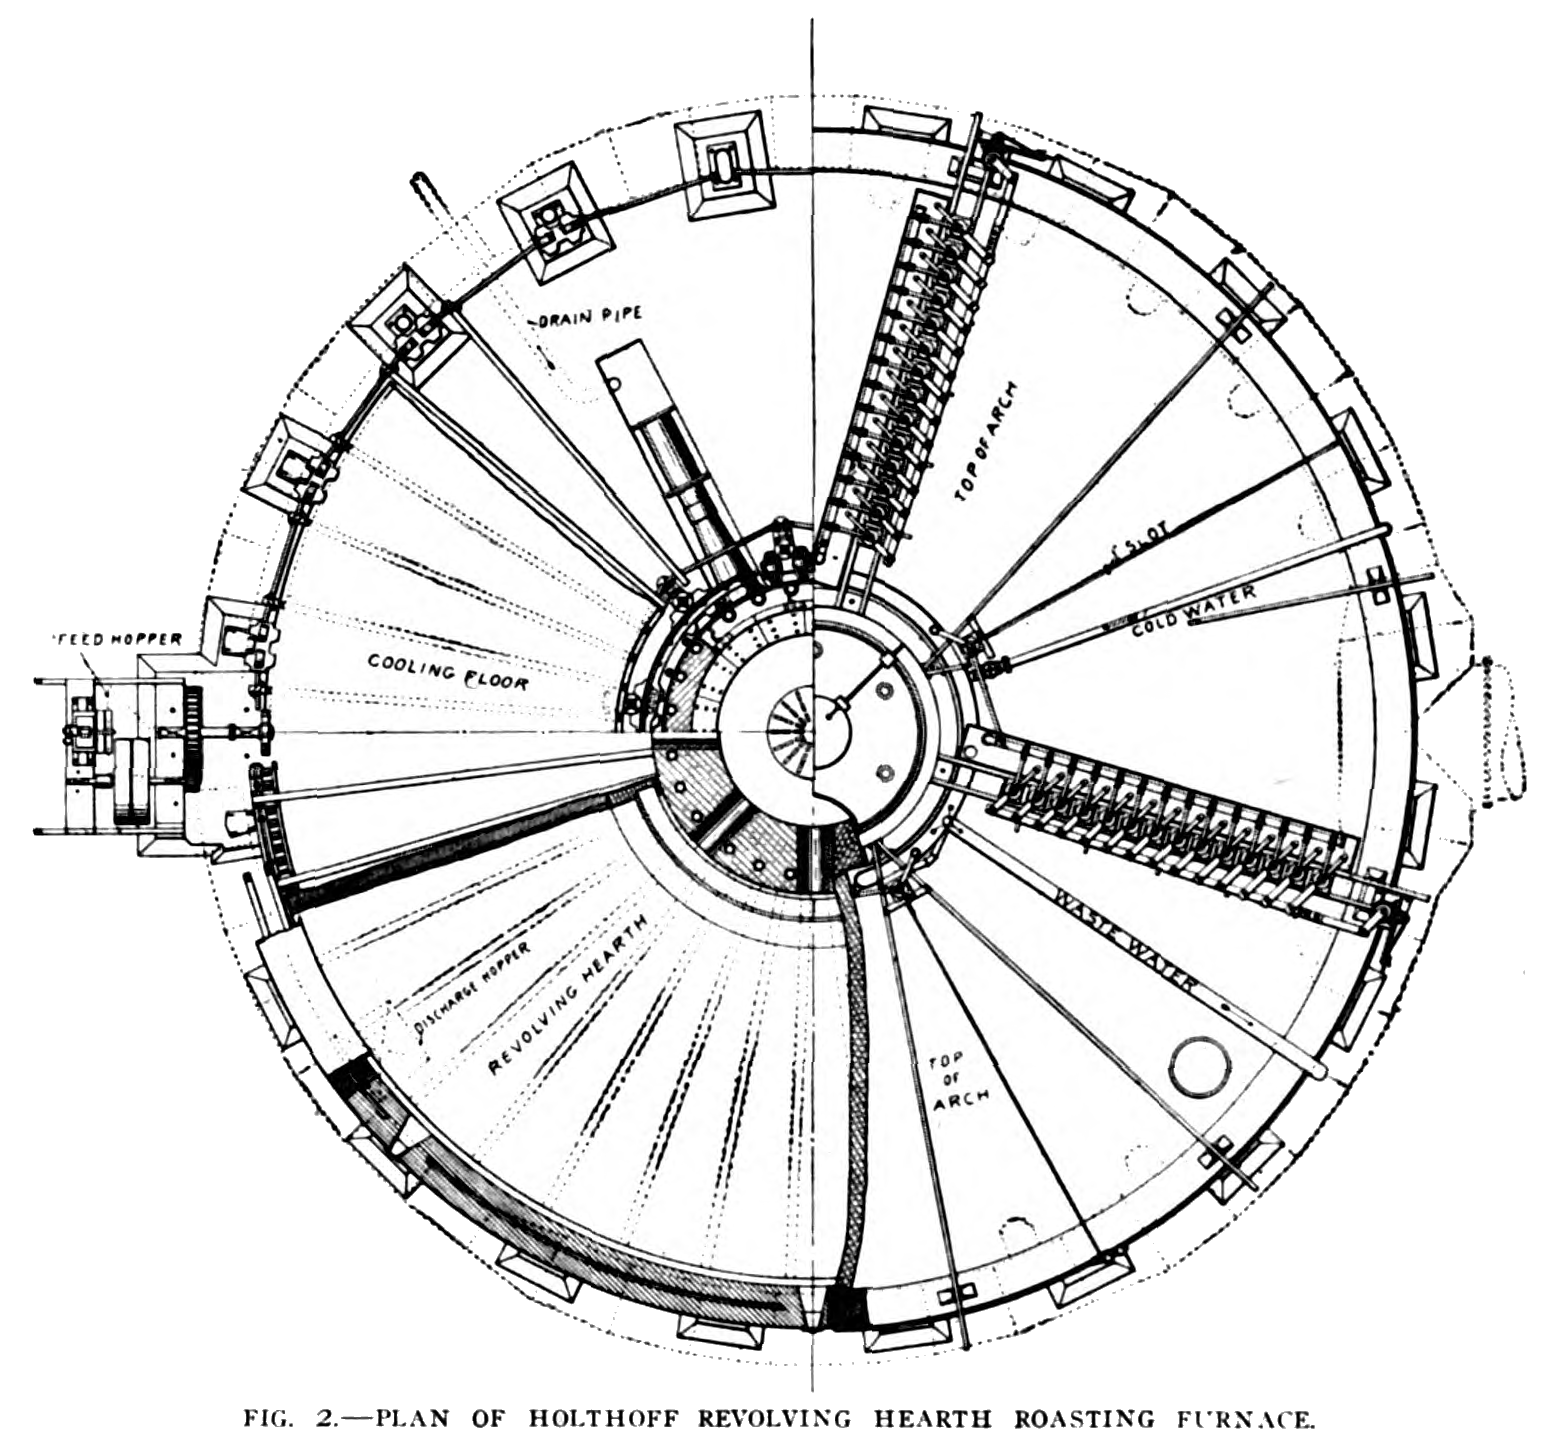 Fig. 2.—Plan of Holthoff Revolving Hearth Roasting Furnace